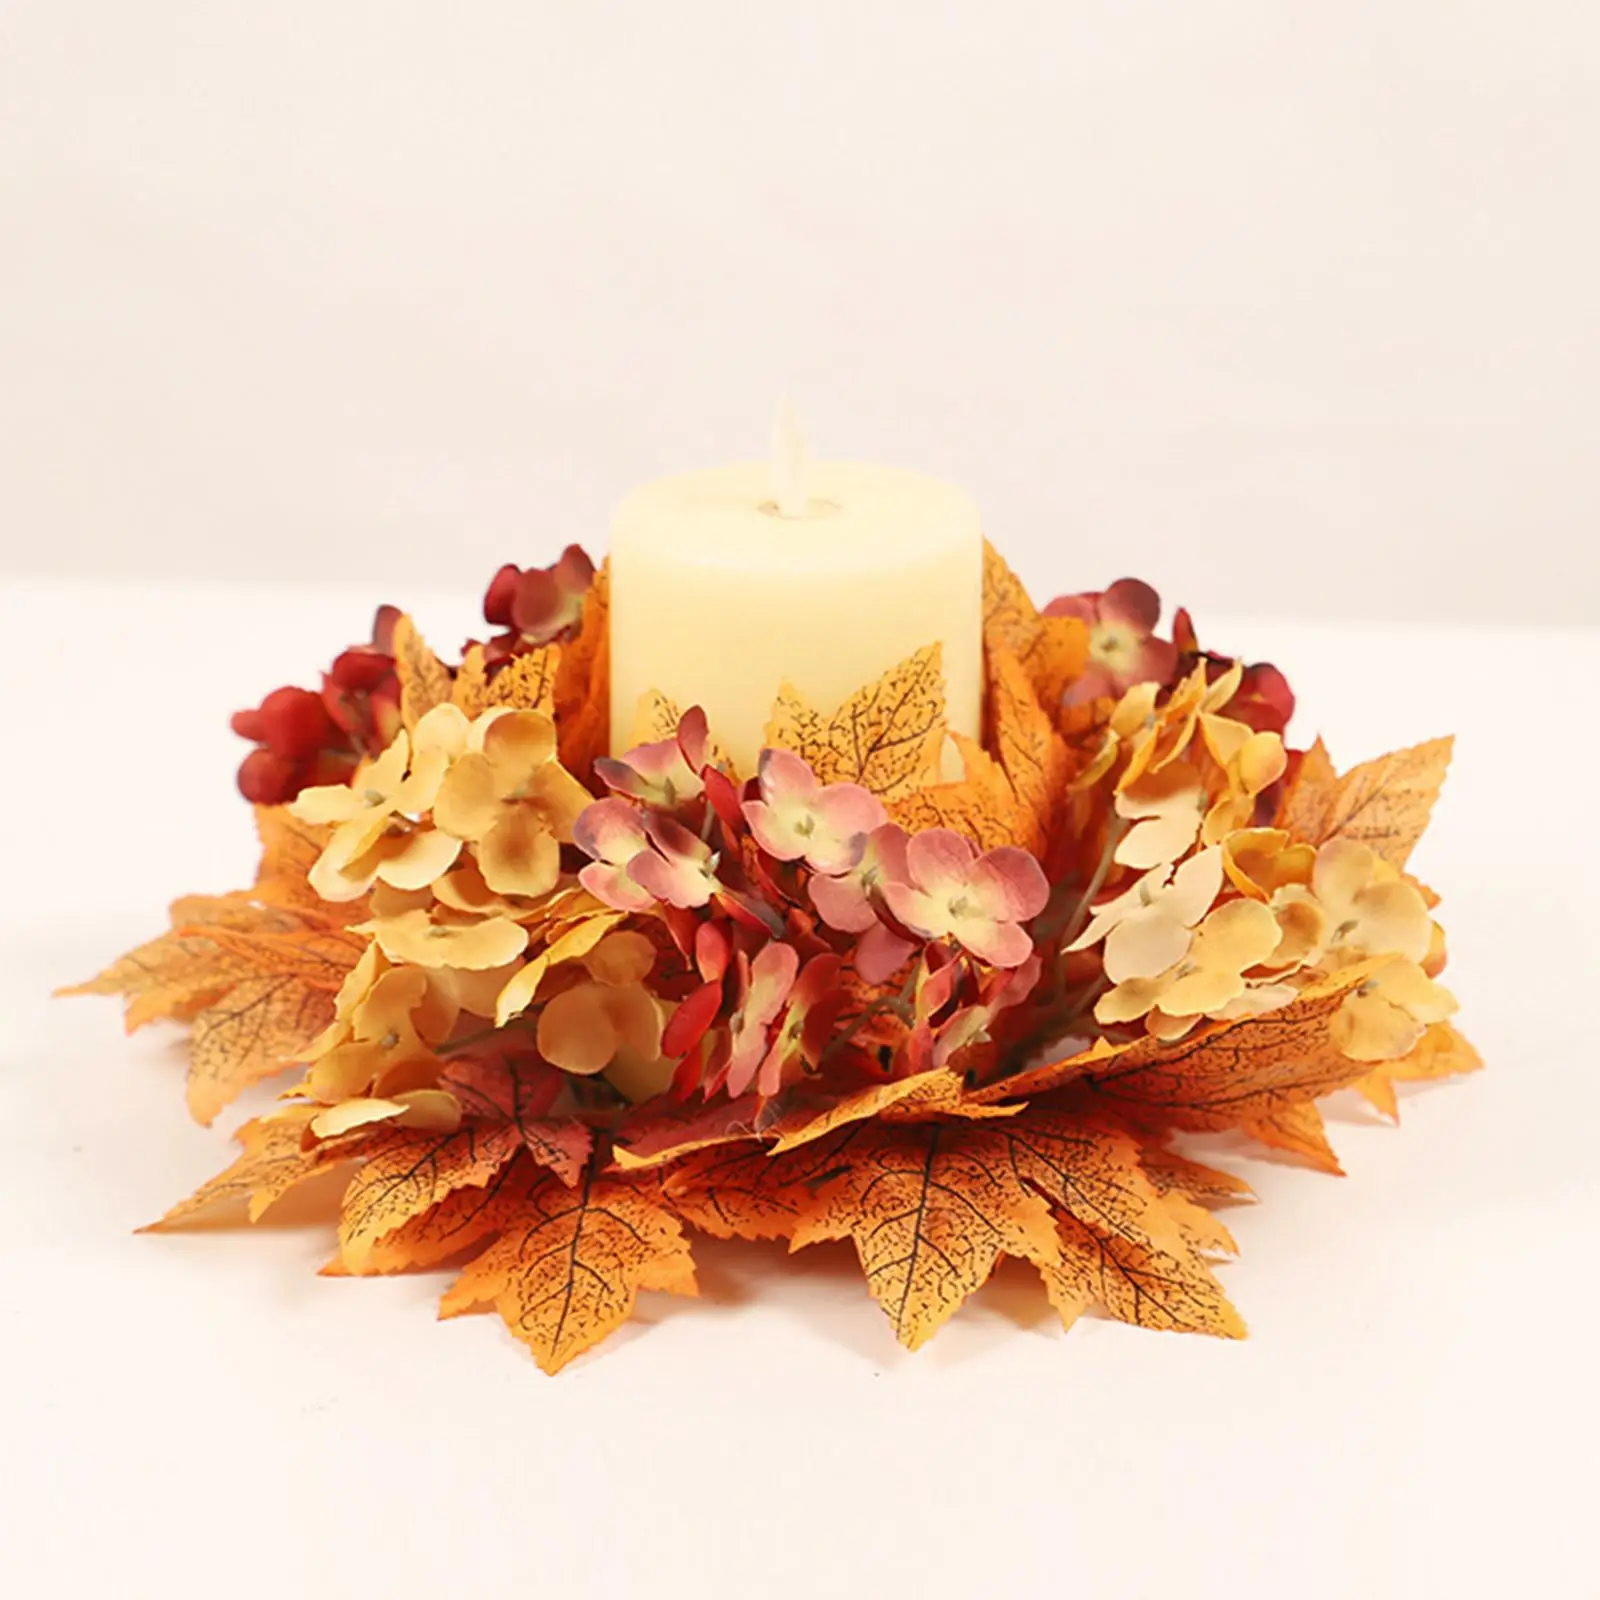 Fall Candle Rings Wreaths Living Room Decor Thanksgiving Candle Stick Holder